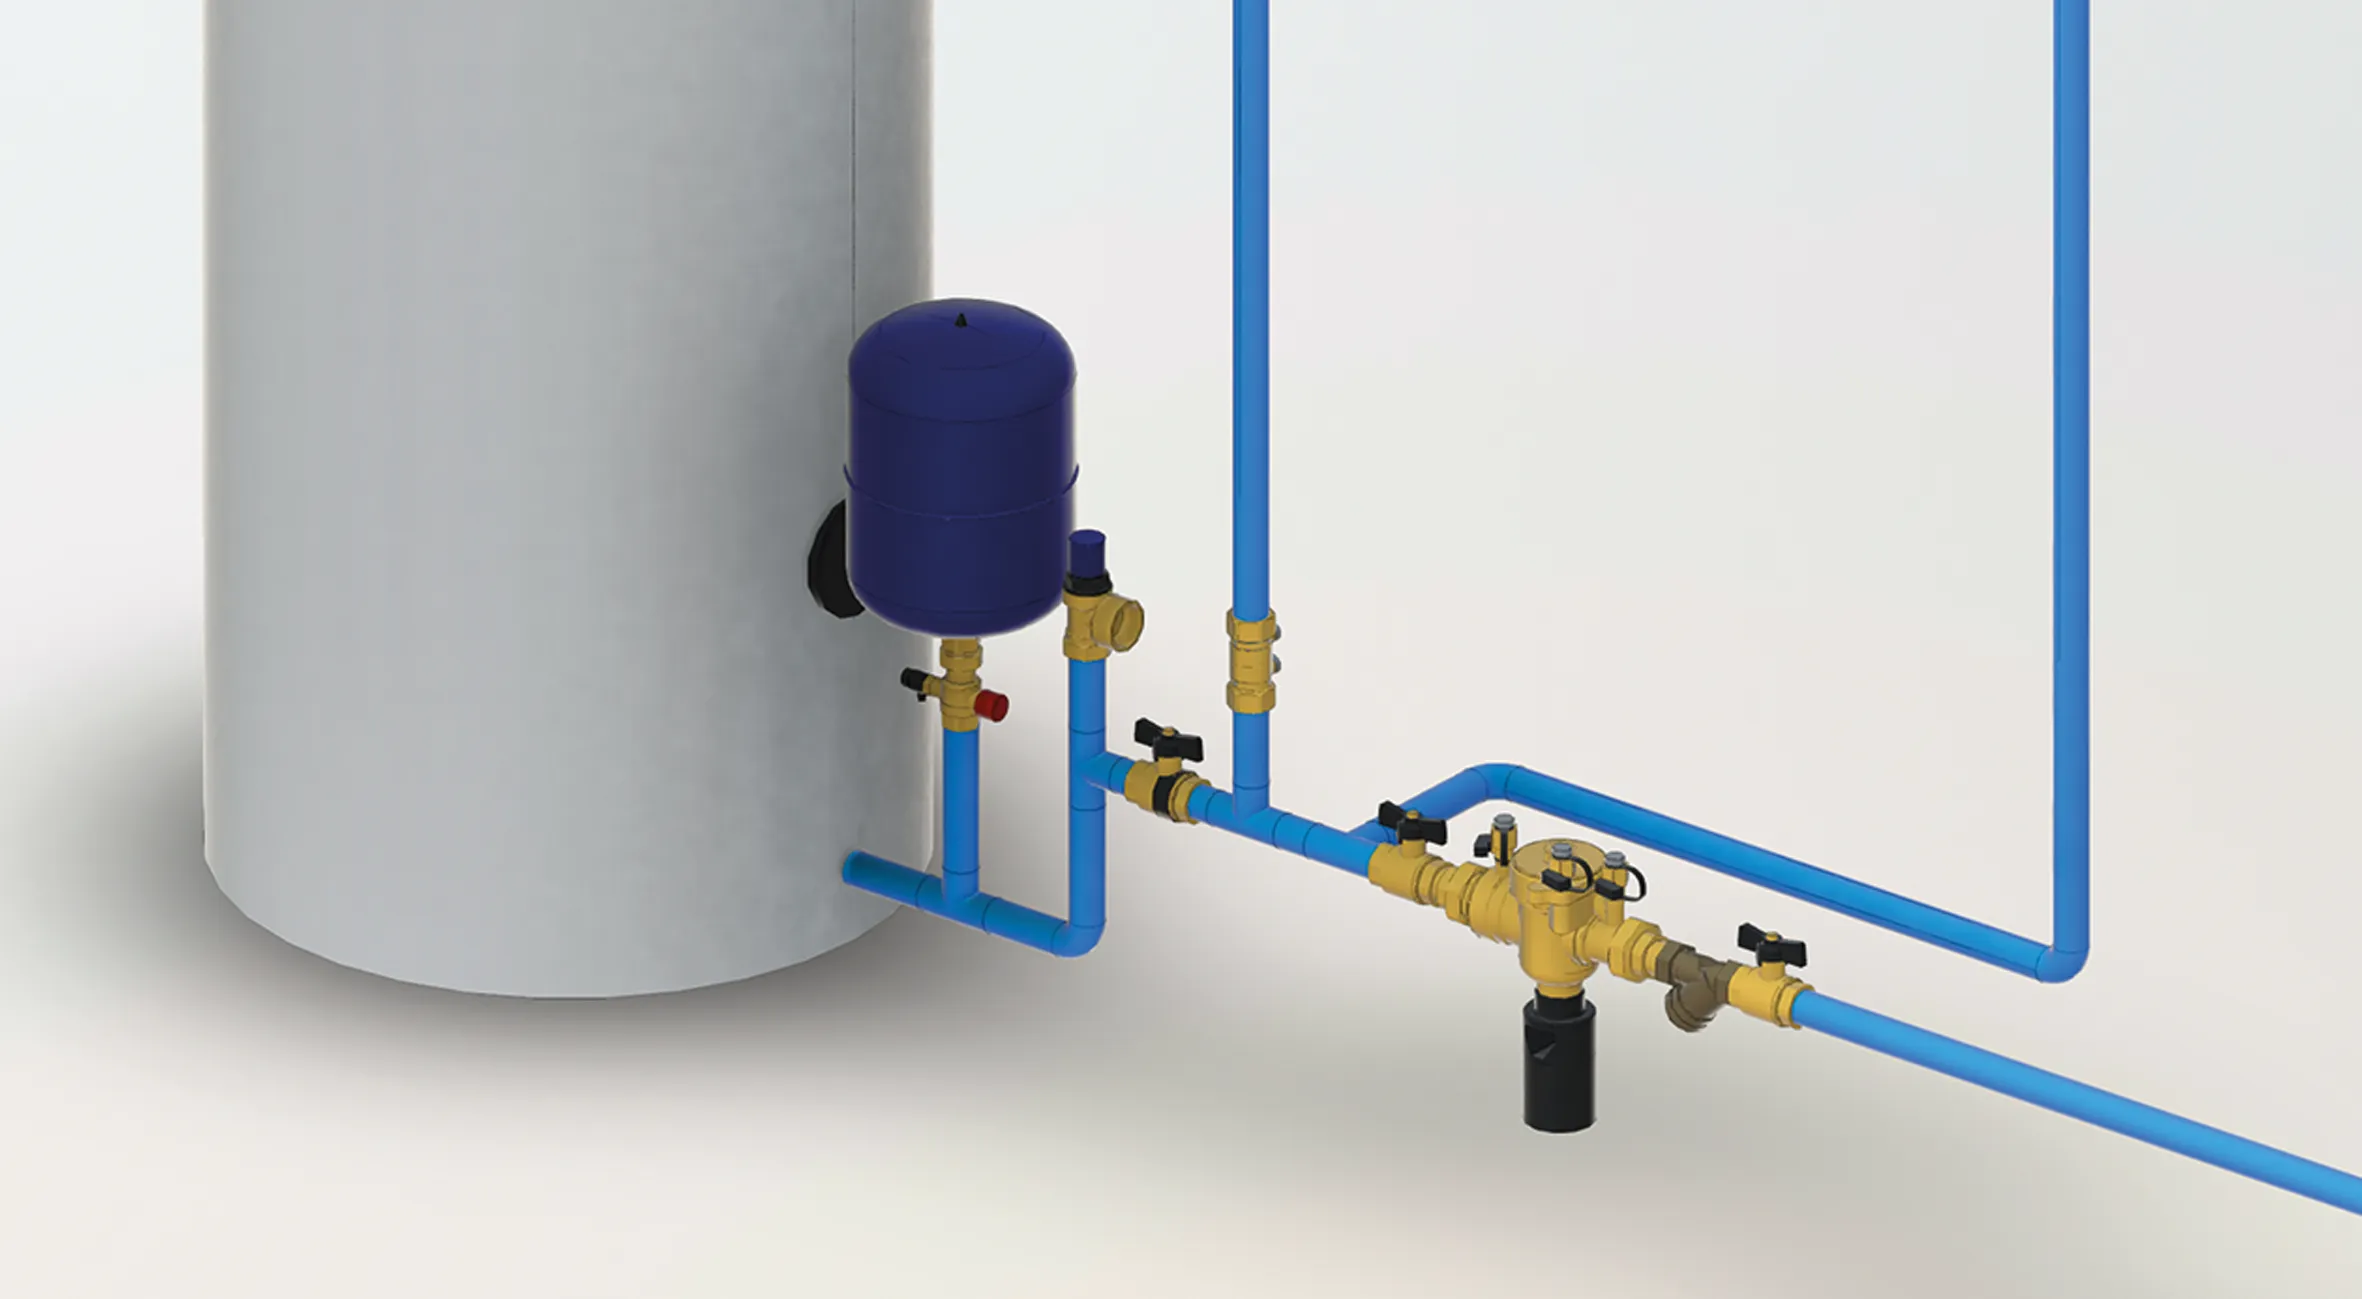 Backflow prevention devices